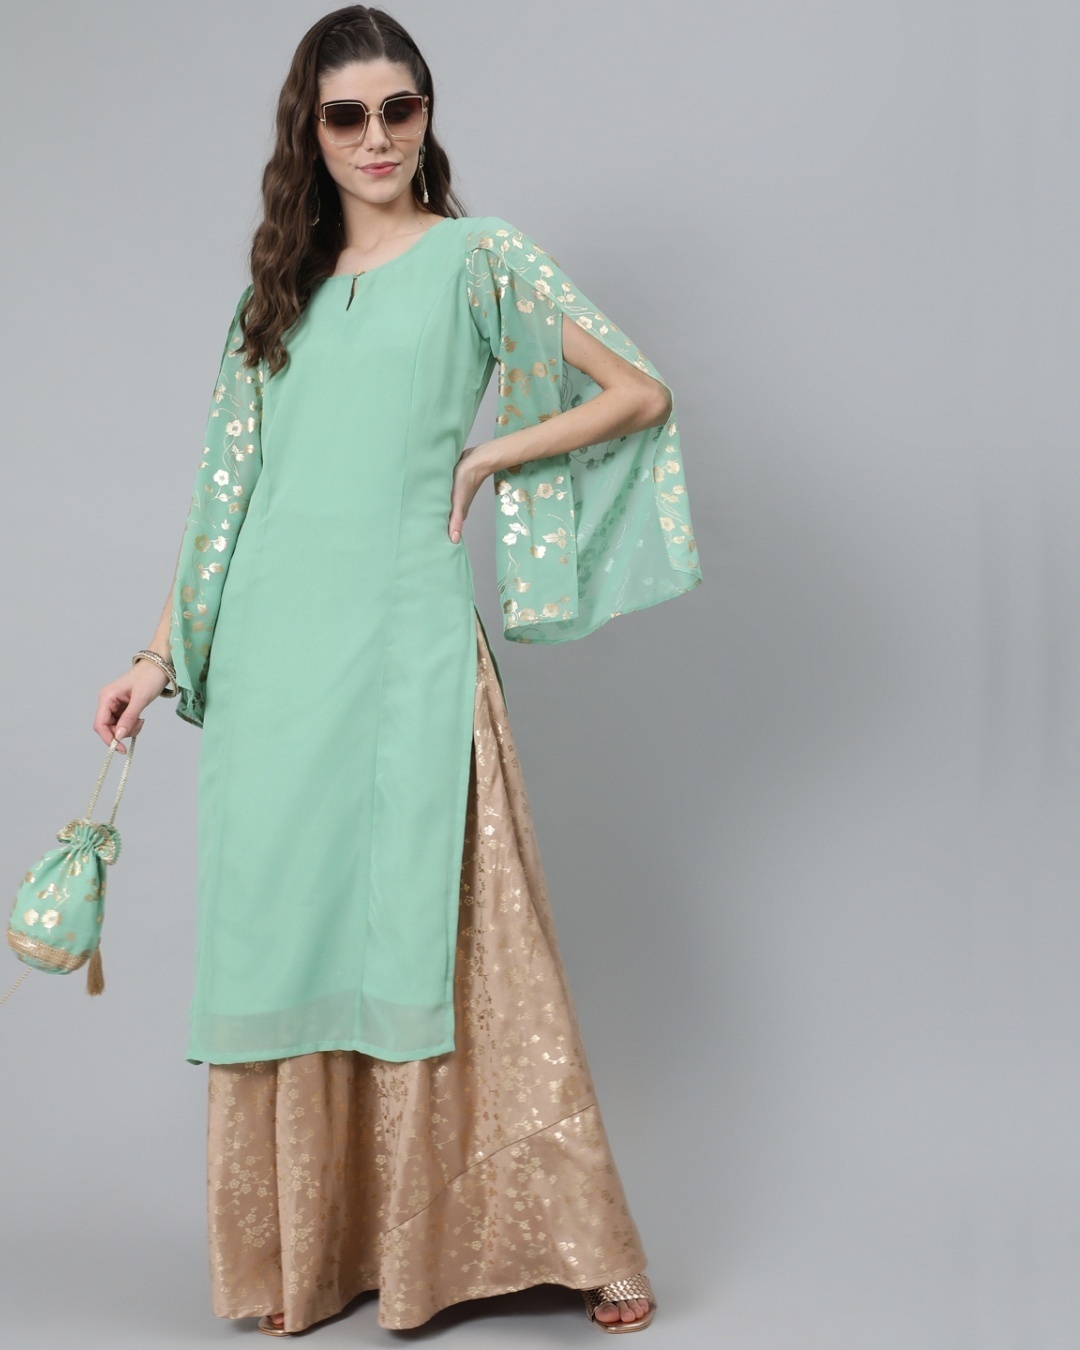 Shop Women's Green Gold Foil Printed Kurta with Open Flared Sleeve and Potli bag